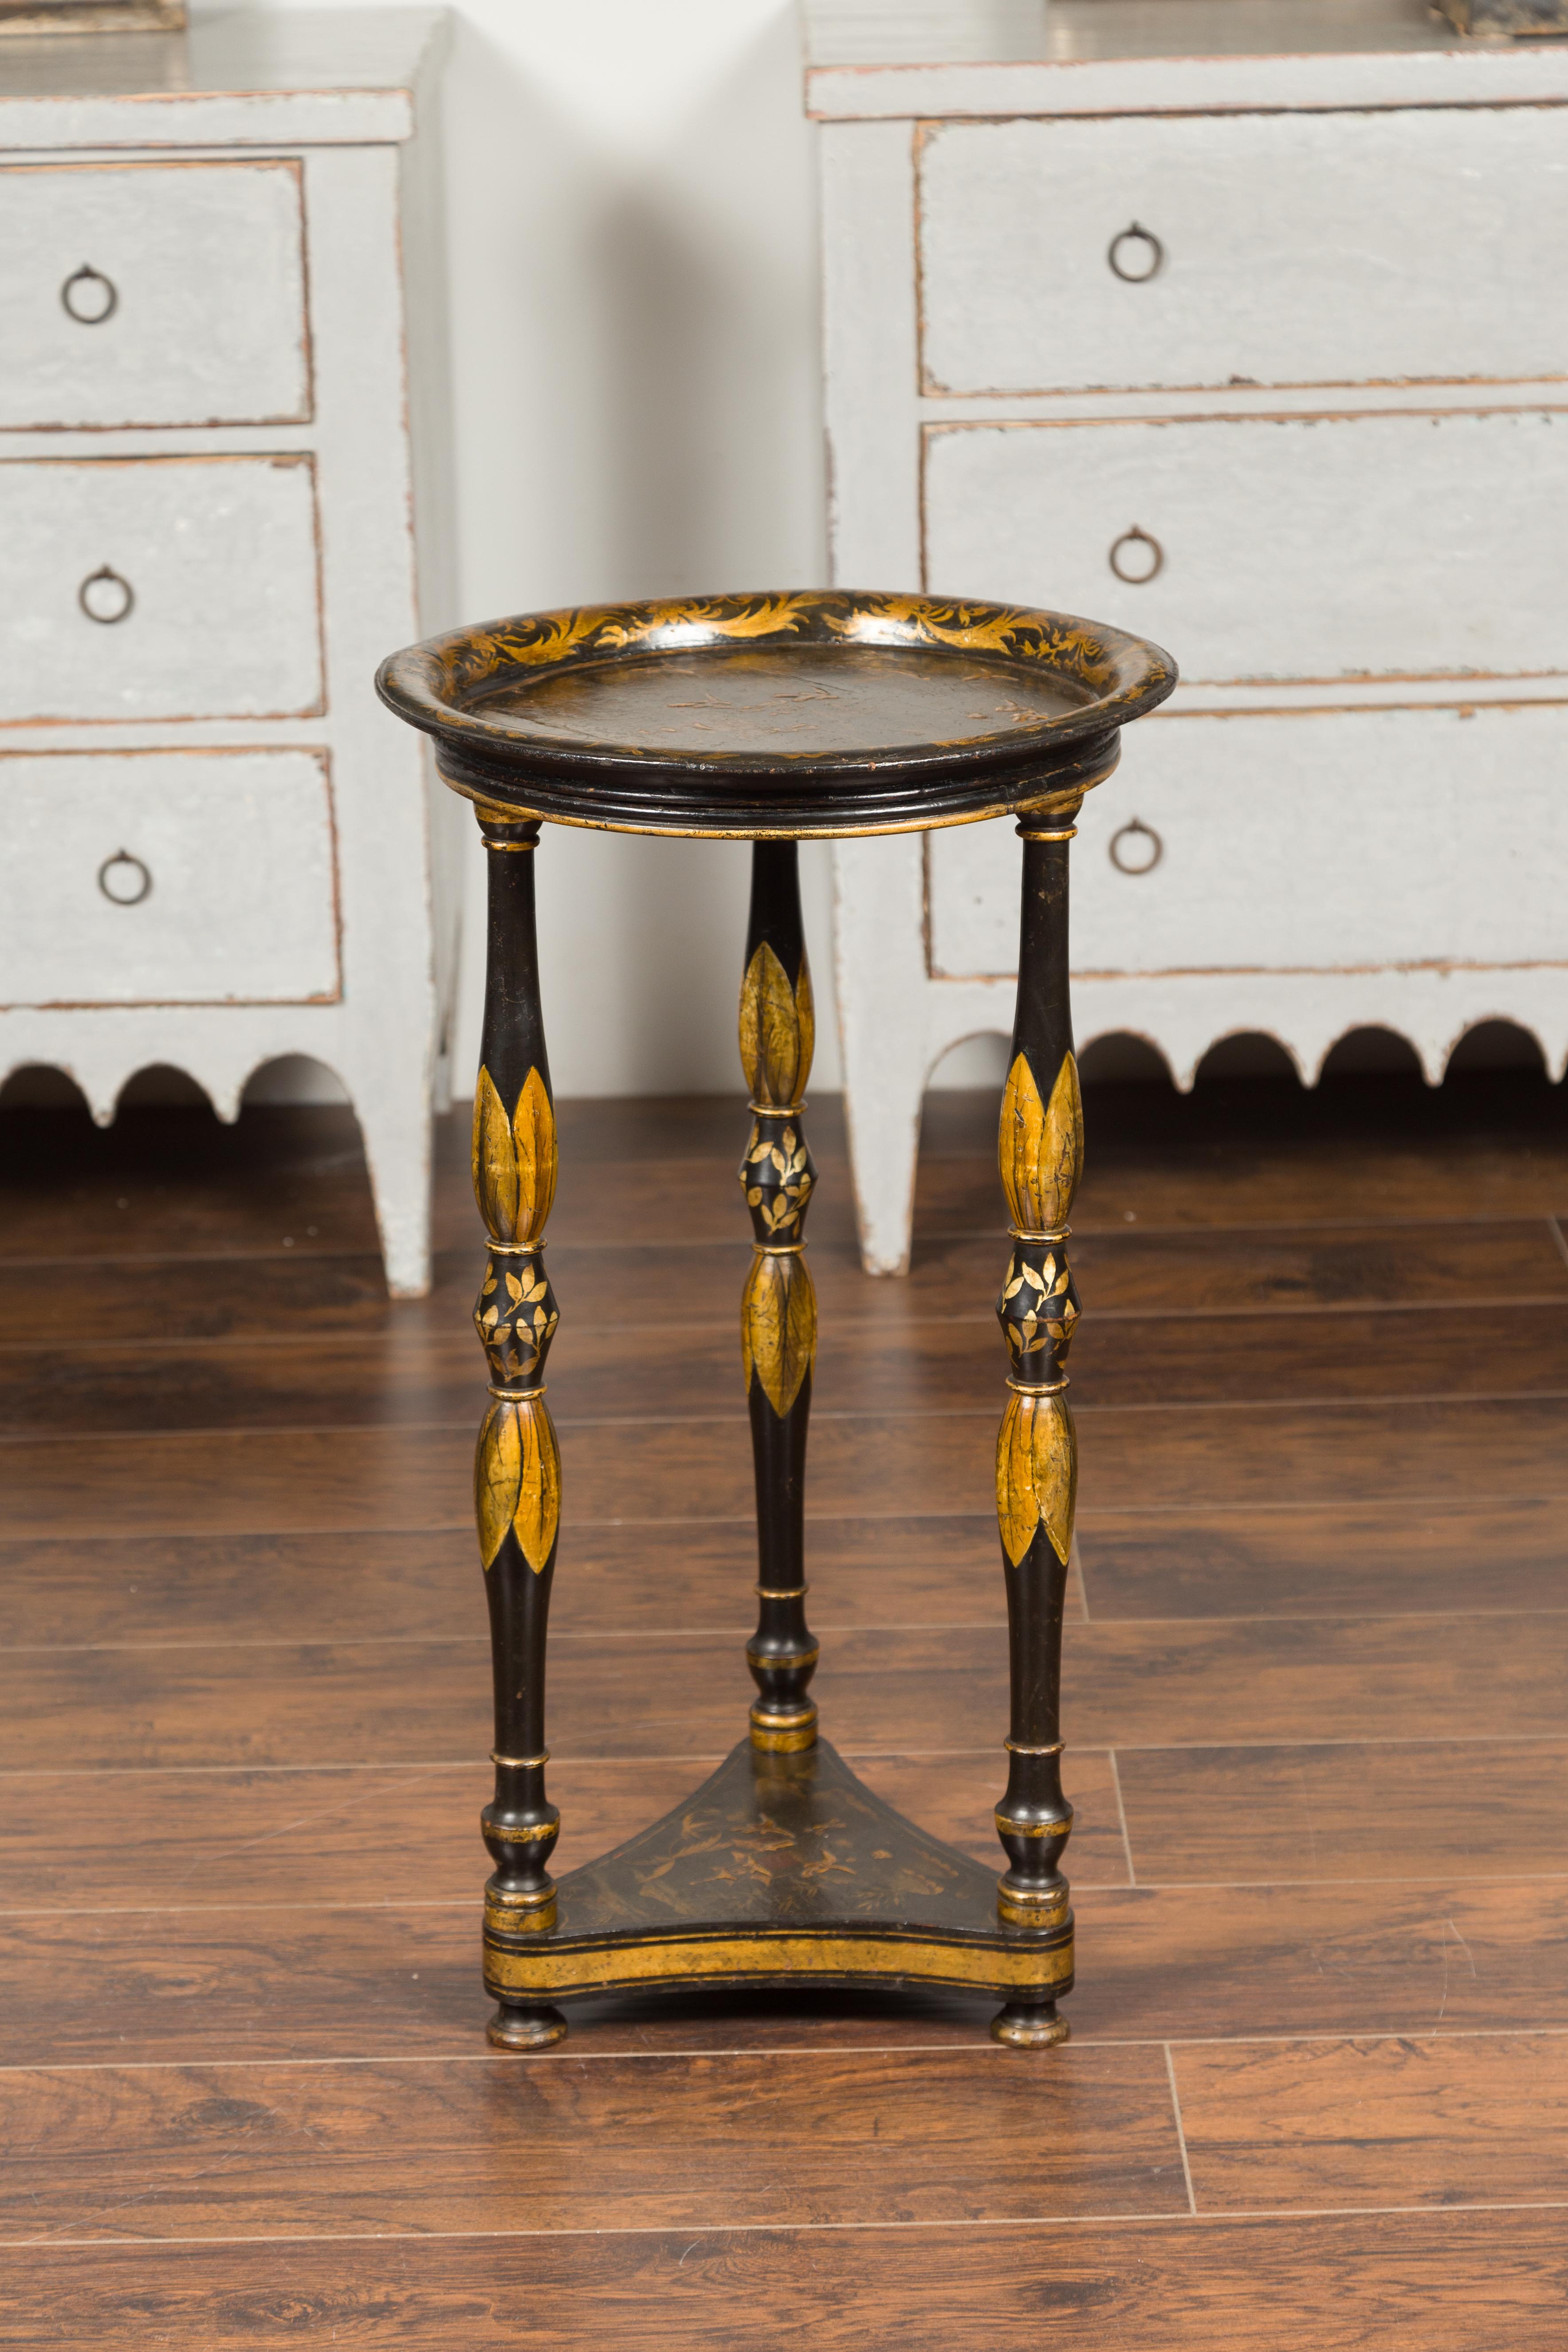 English 1850s Black Chinoiserie Guéridon Table with Gilt Motifs and Turned Legs For Sale 7